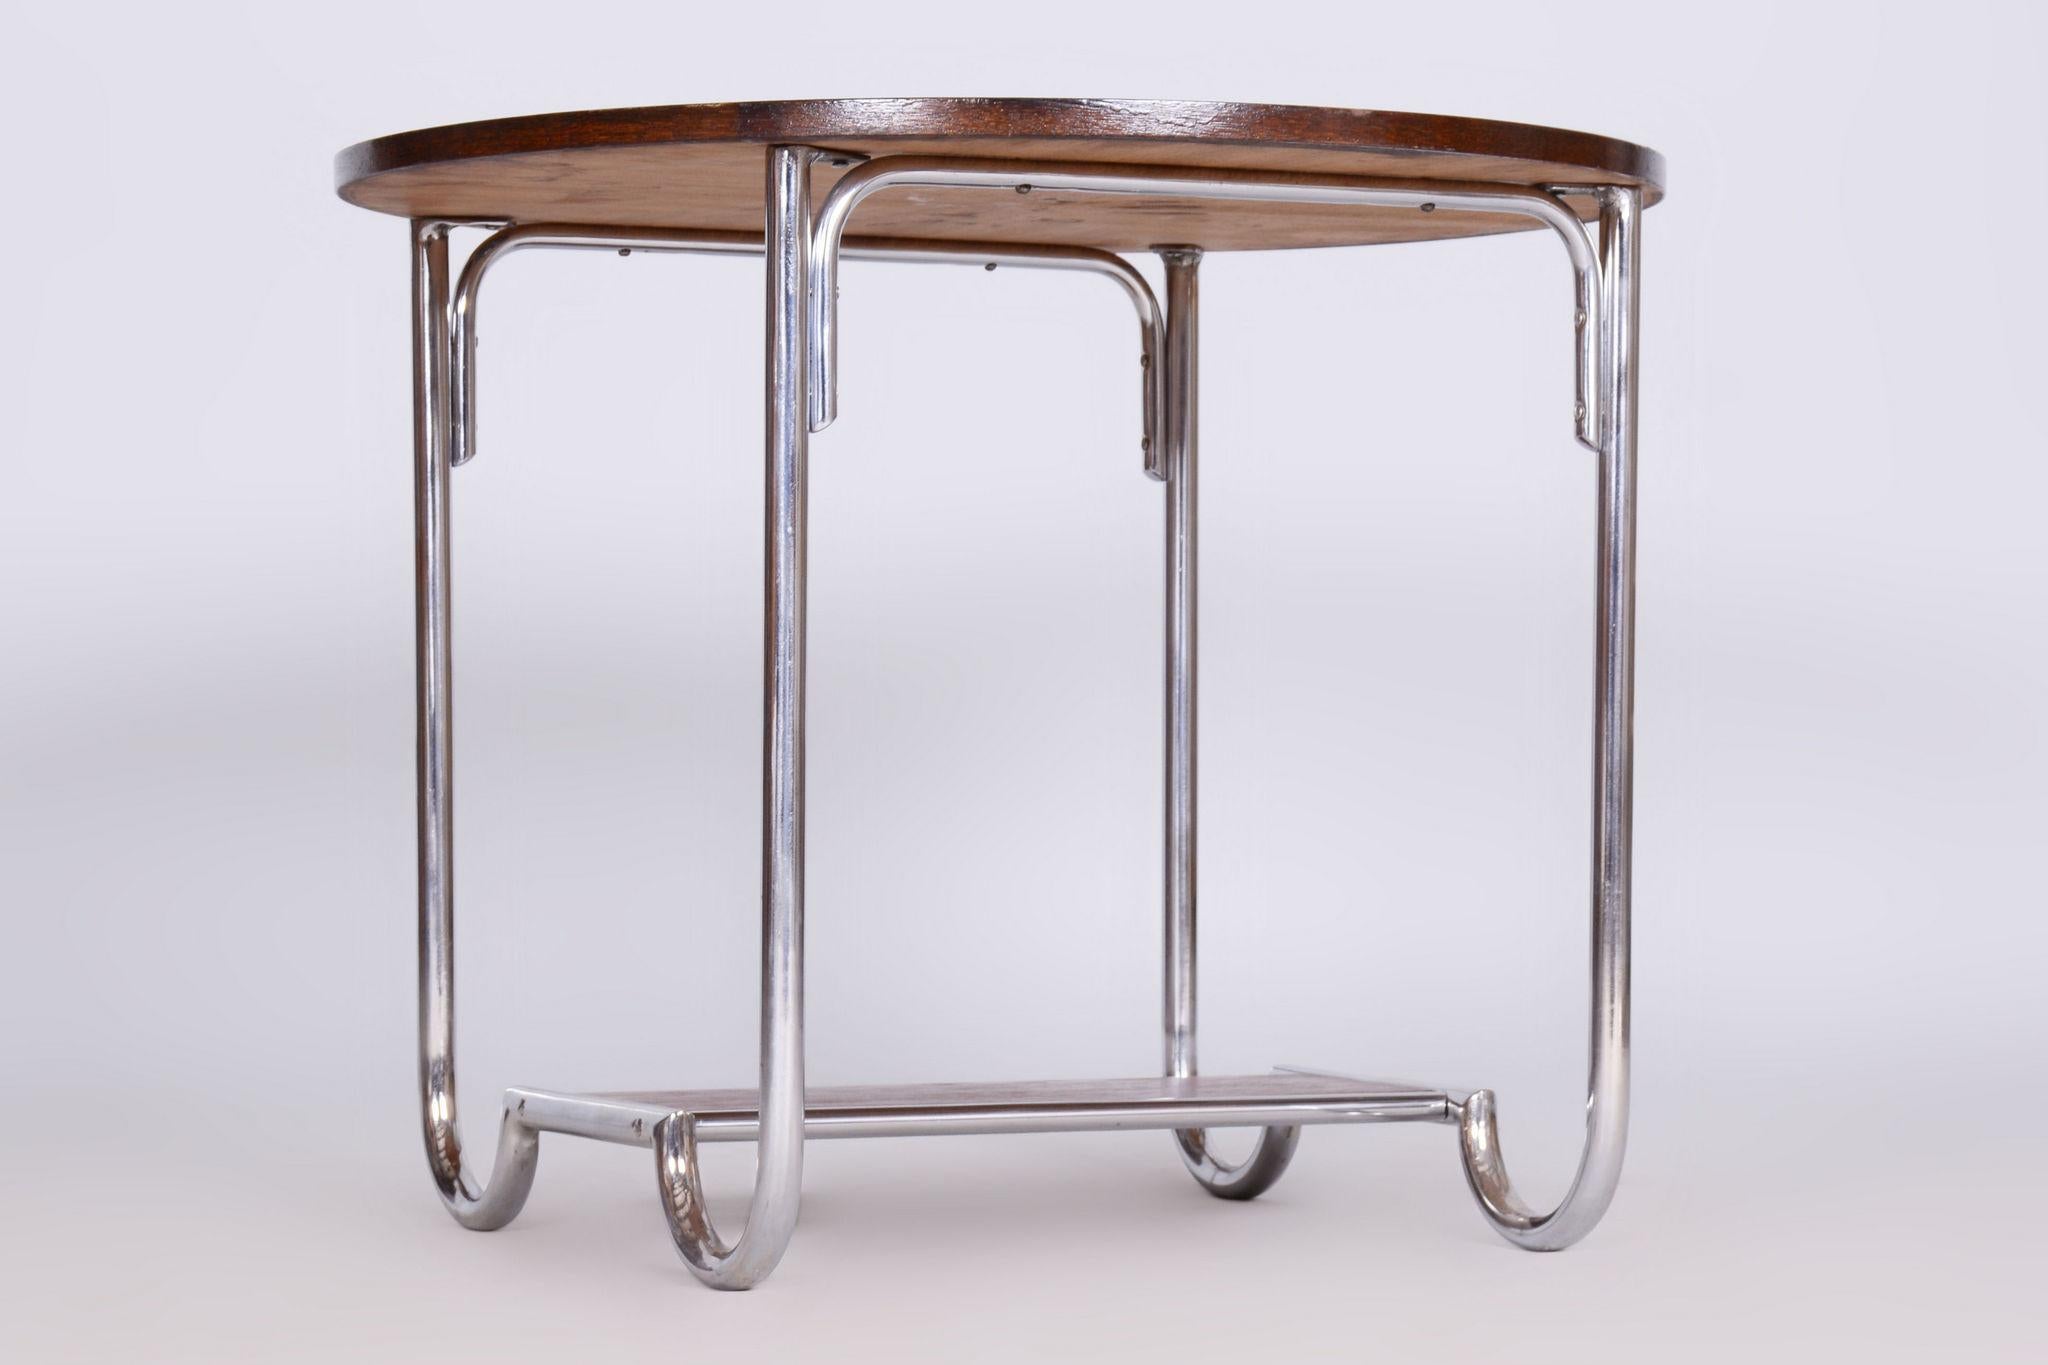 Restored Bauhaus Oak Small Round Table

Period: 1930-1939
Source: Czechia (Czechoslovakia)
Material: Oak, Chrome-Plated Steel

Revived polish.
The chrome parts have been cleaned and professionally restored. 

This item features classic Bauhaus